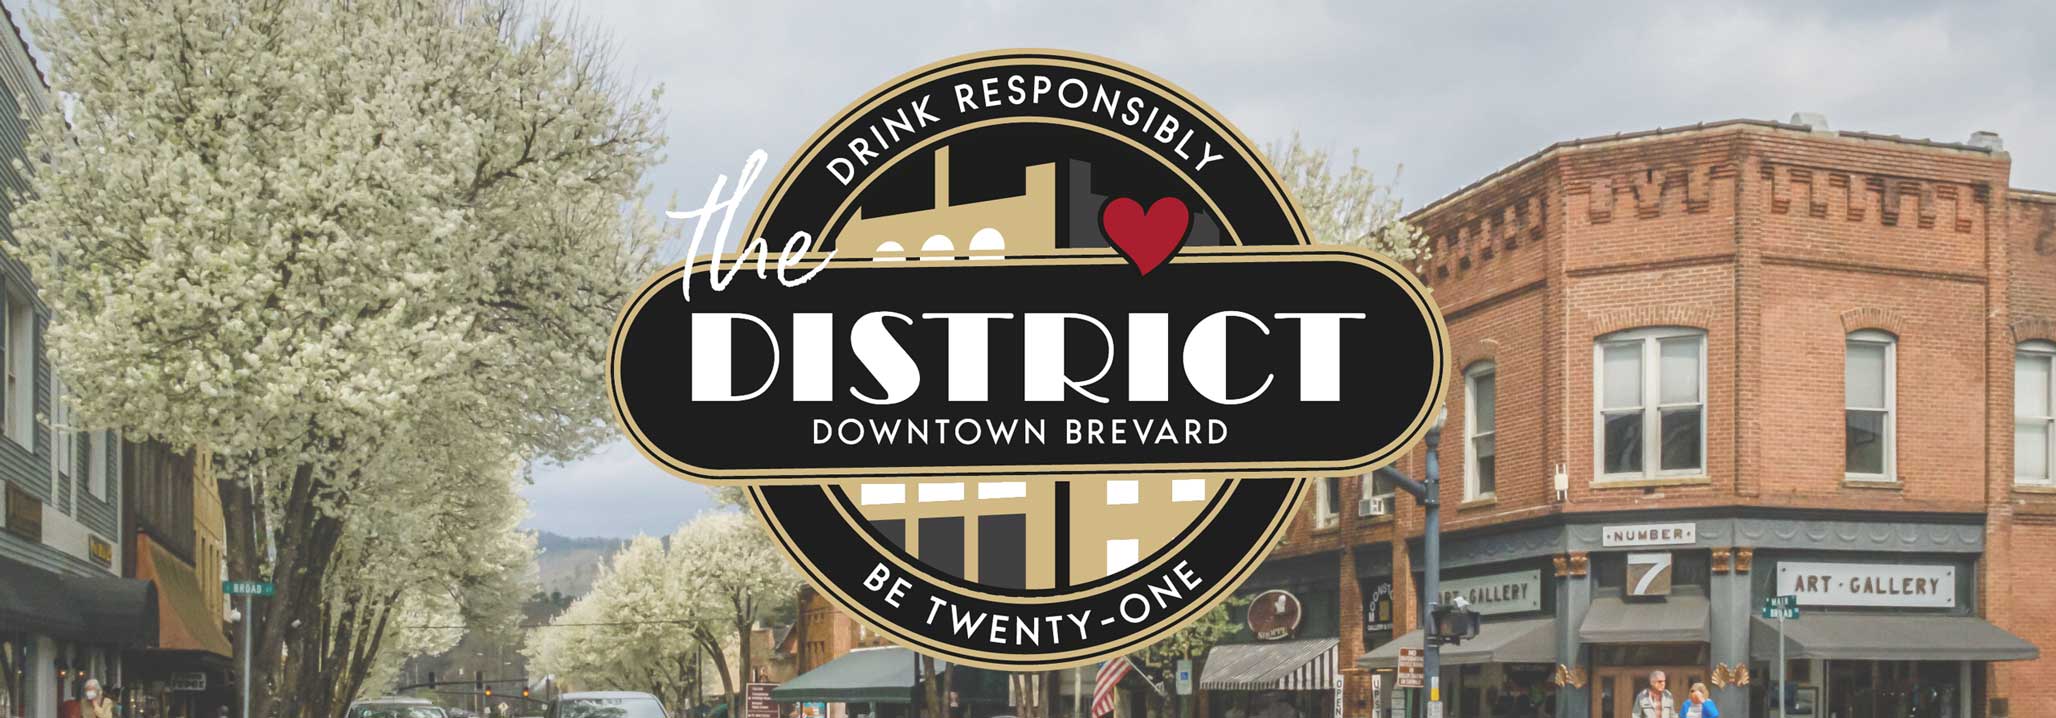 The District Header with logo